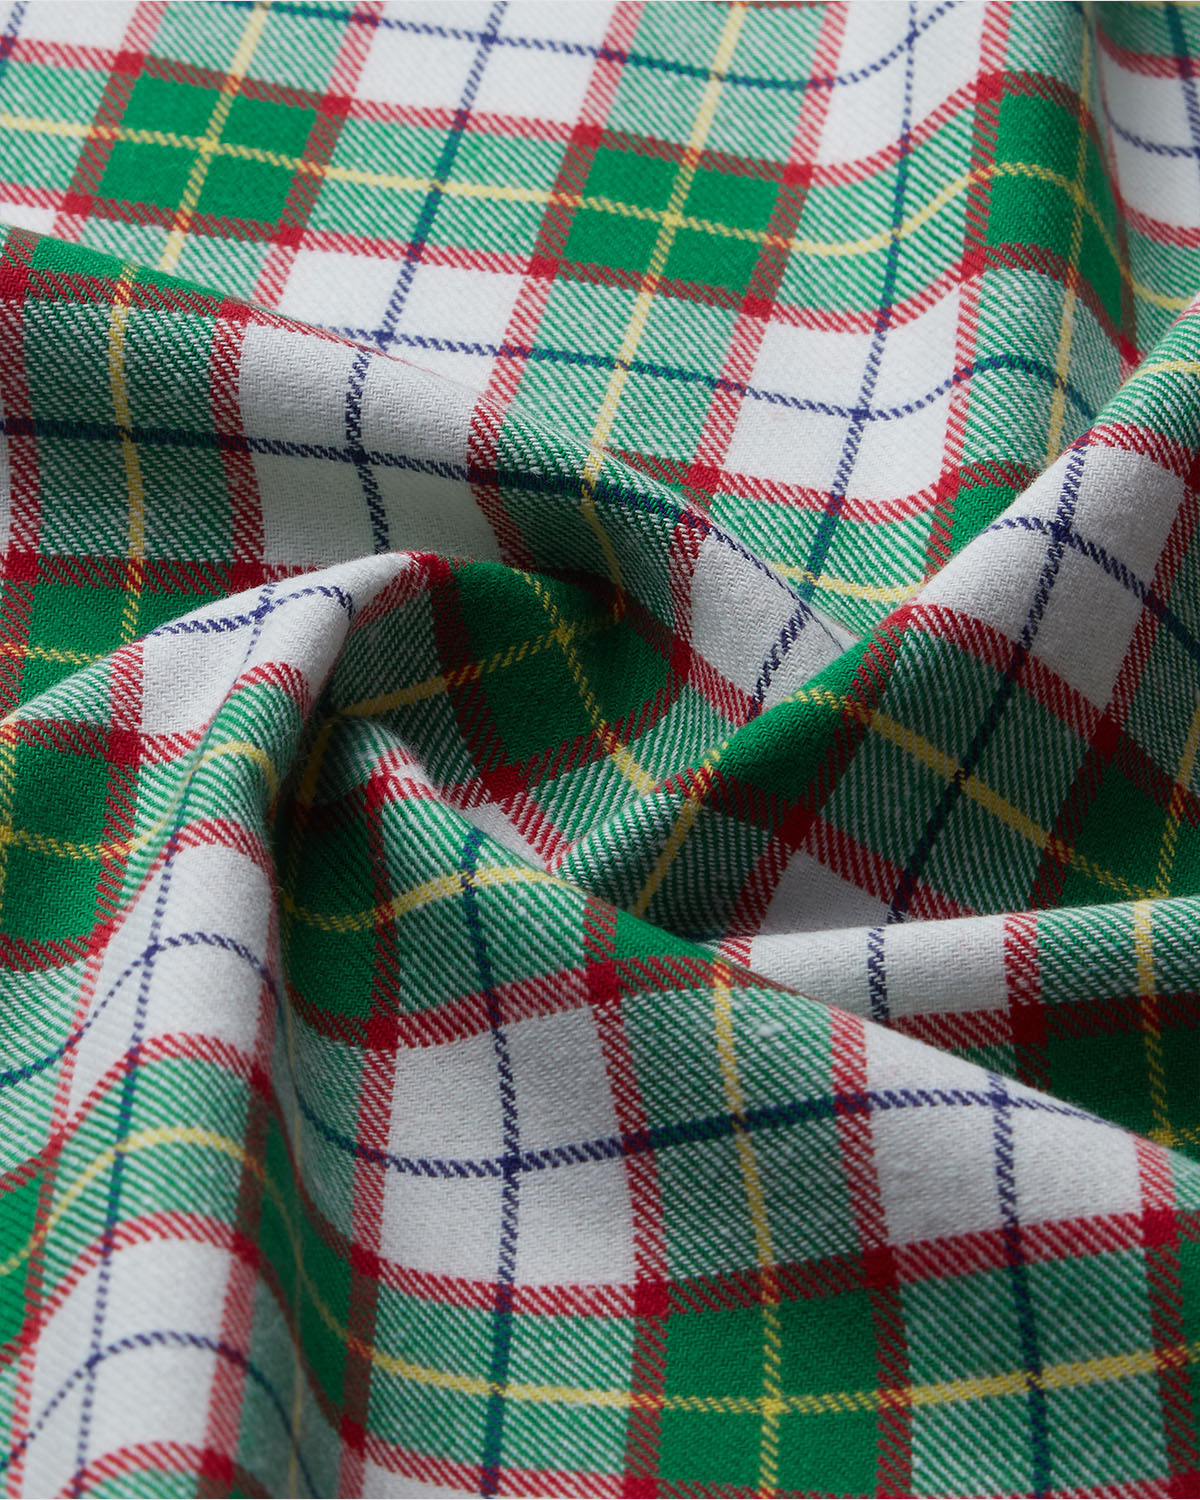 Flannel Checked Shirt - Green